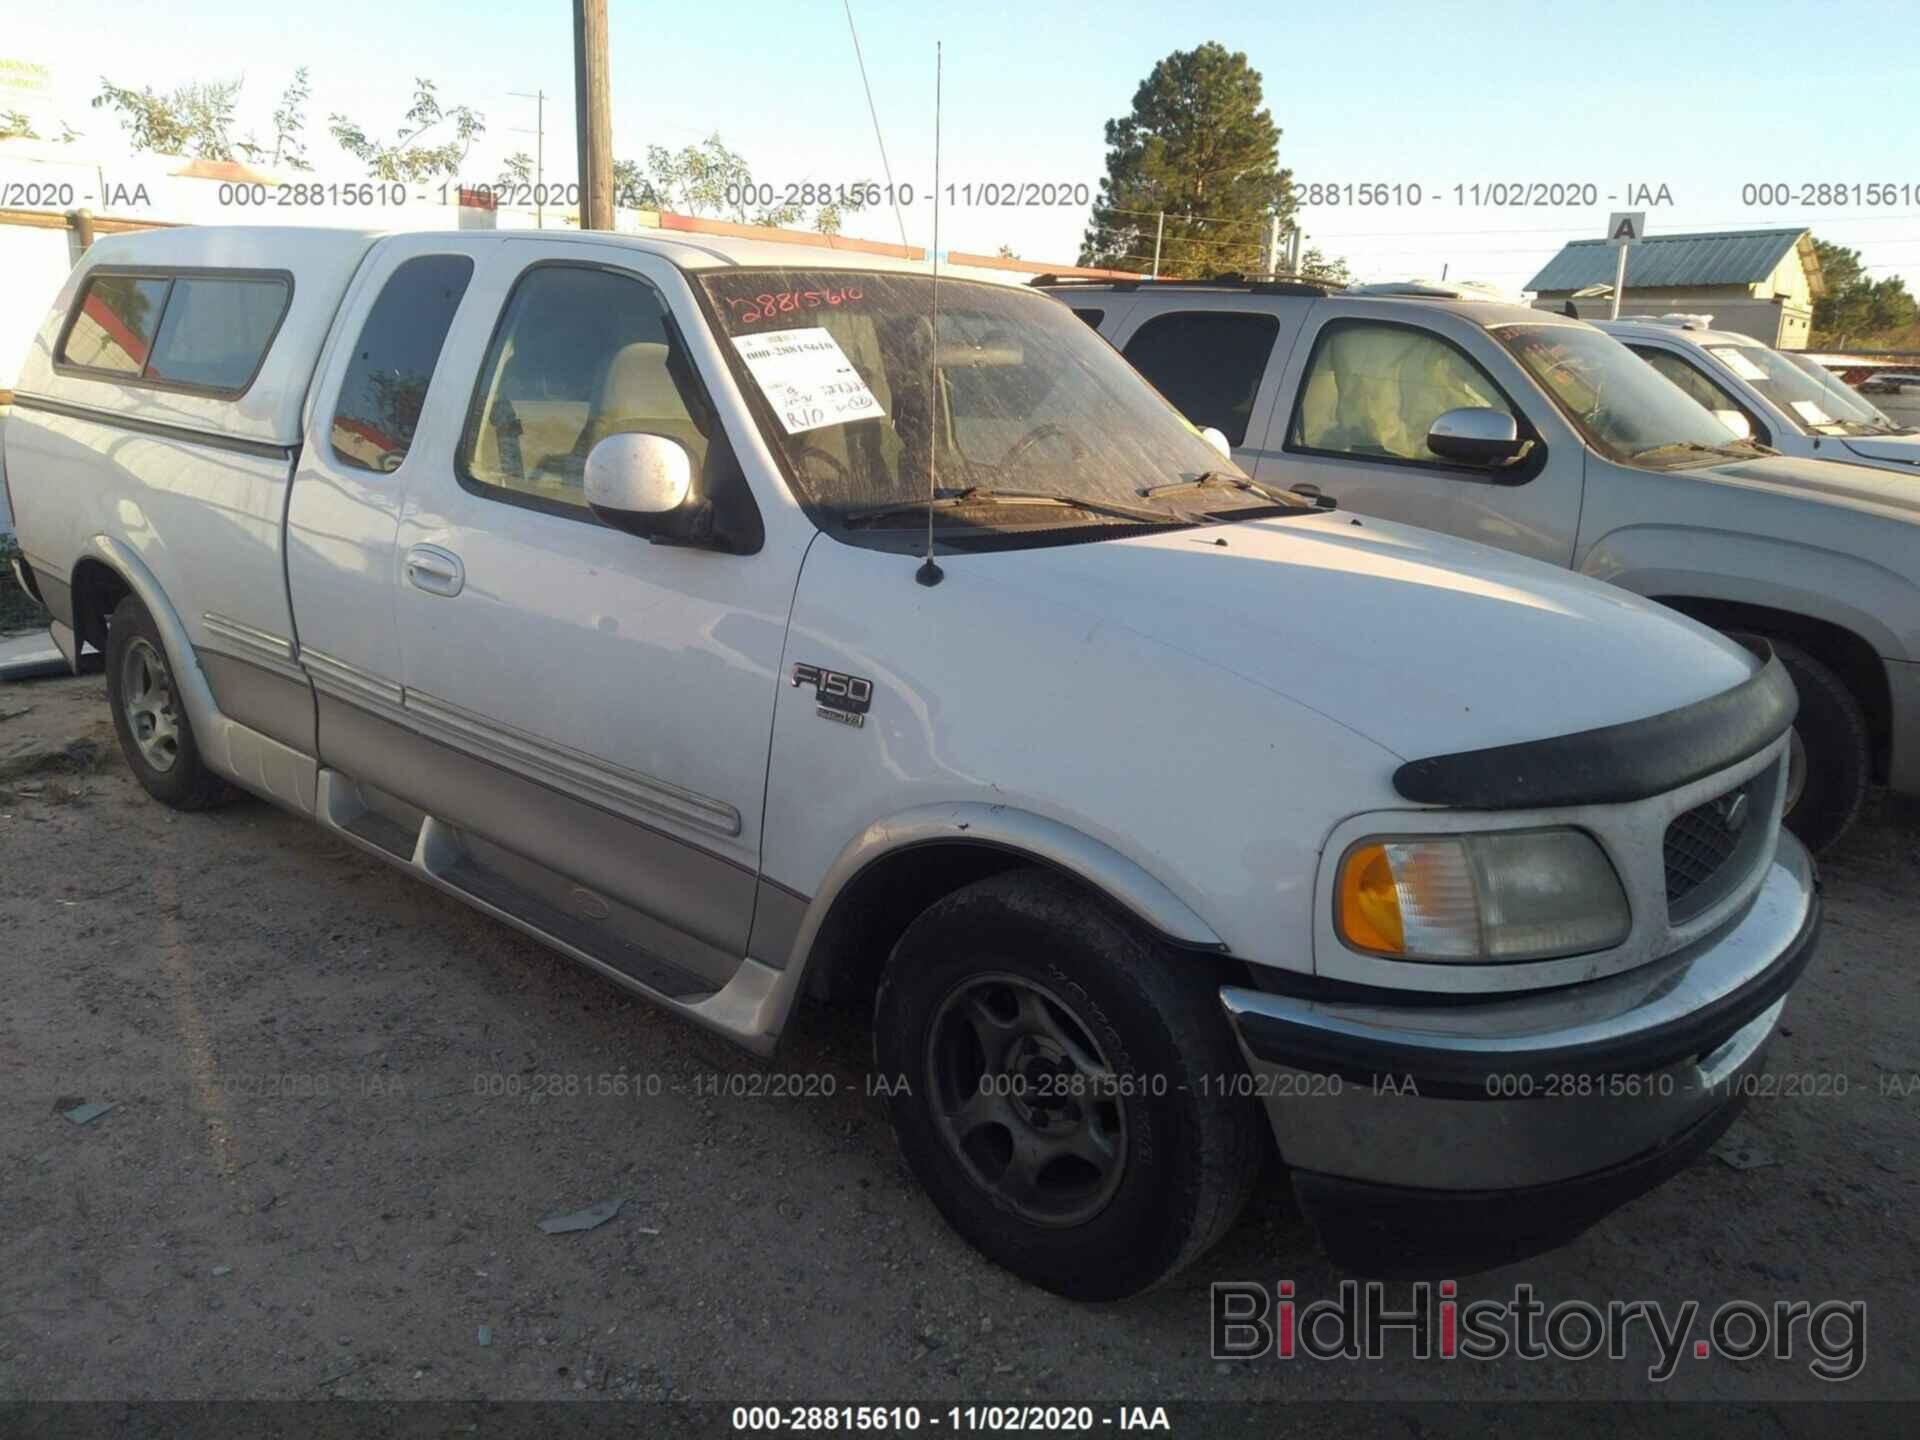 Photo 1FTZX1766WKC08819 - FORD F-150 1998